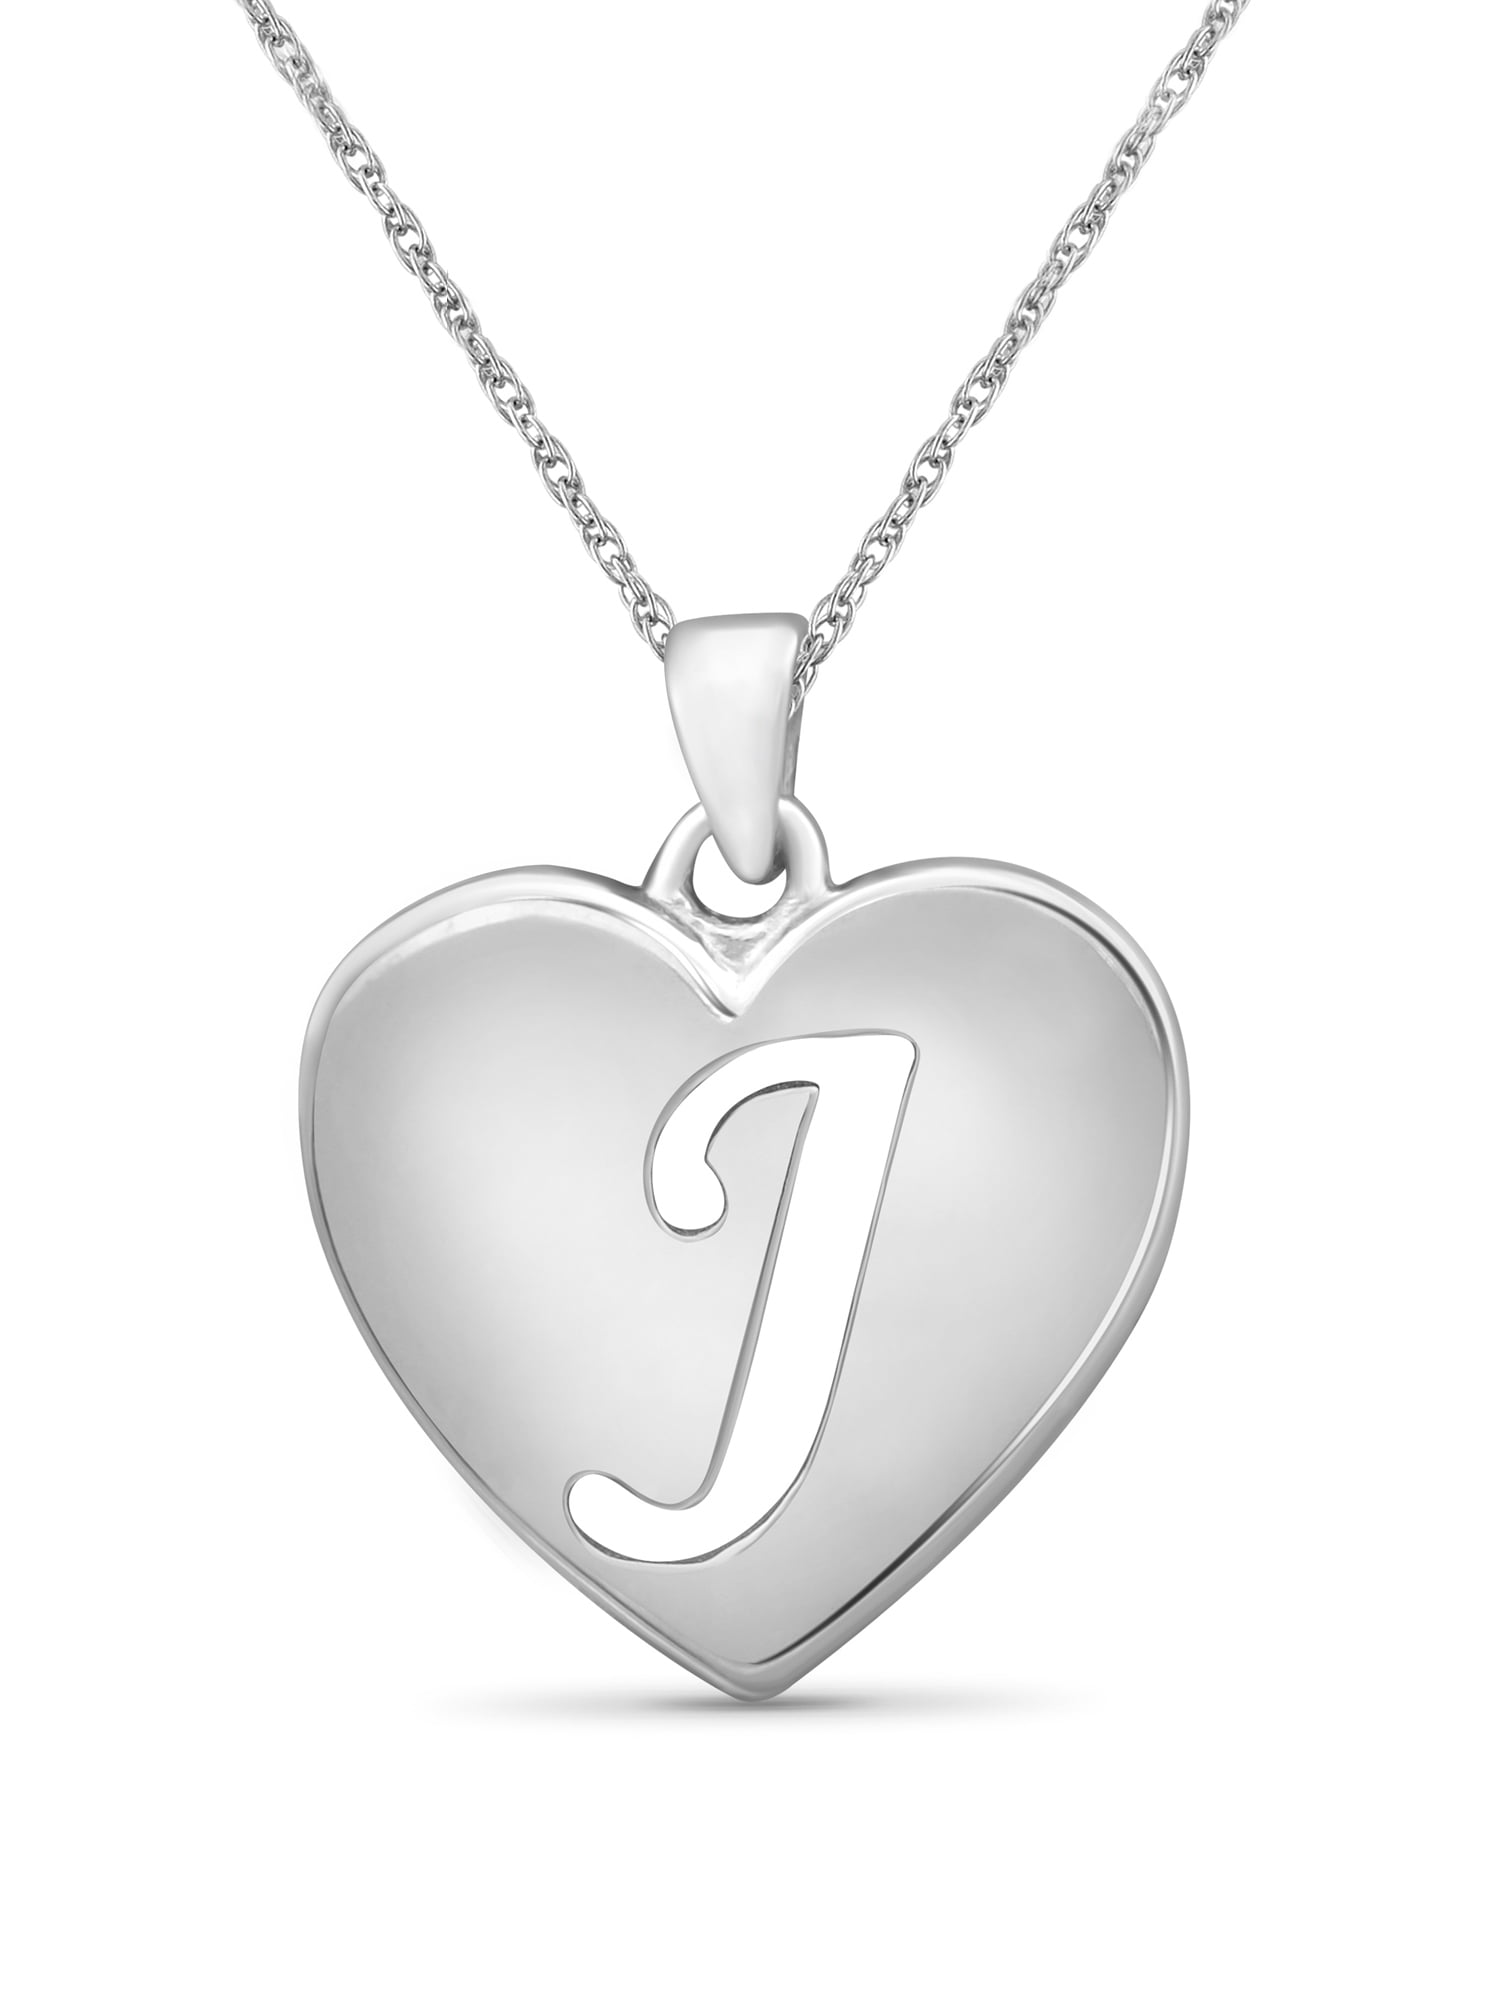 Initial Letter Pendant Necklace for Men Women Sterling Silver/Gold Plated  Box Chain Necklace 20 Inches Initial Necklaces for Men - Walmart.com